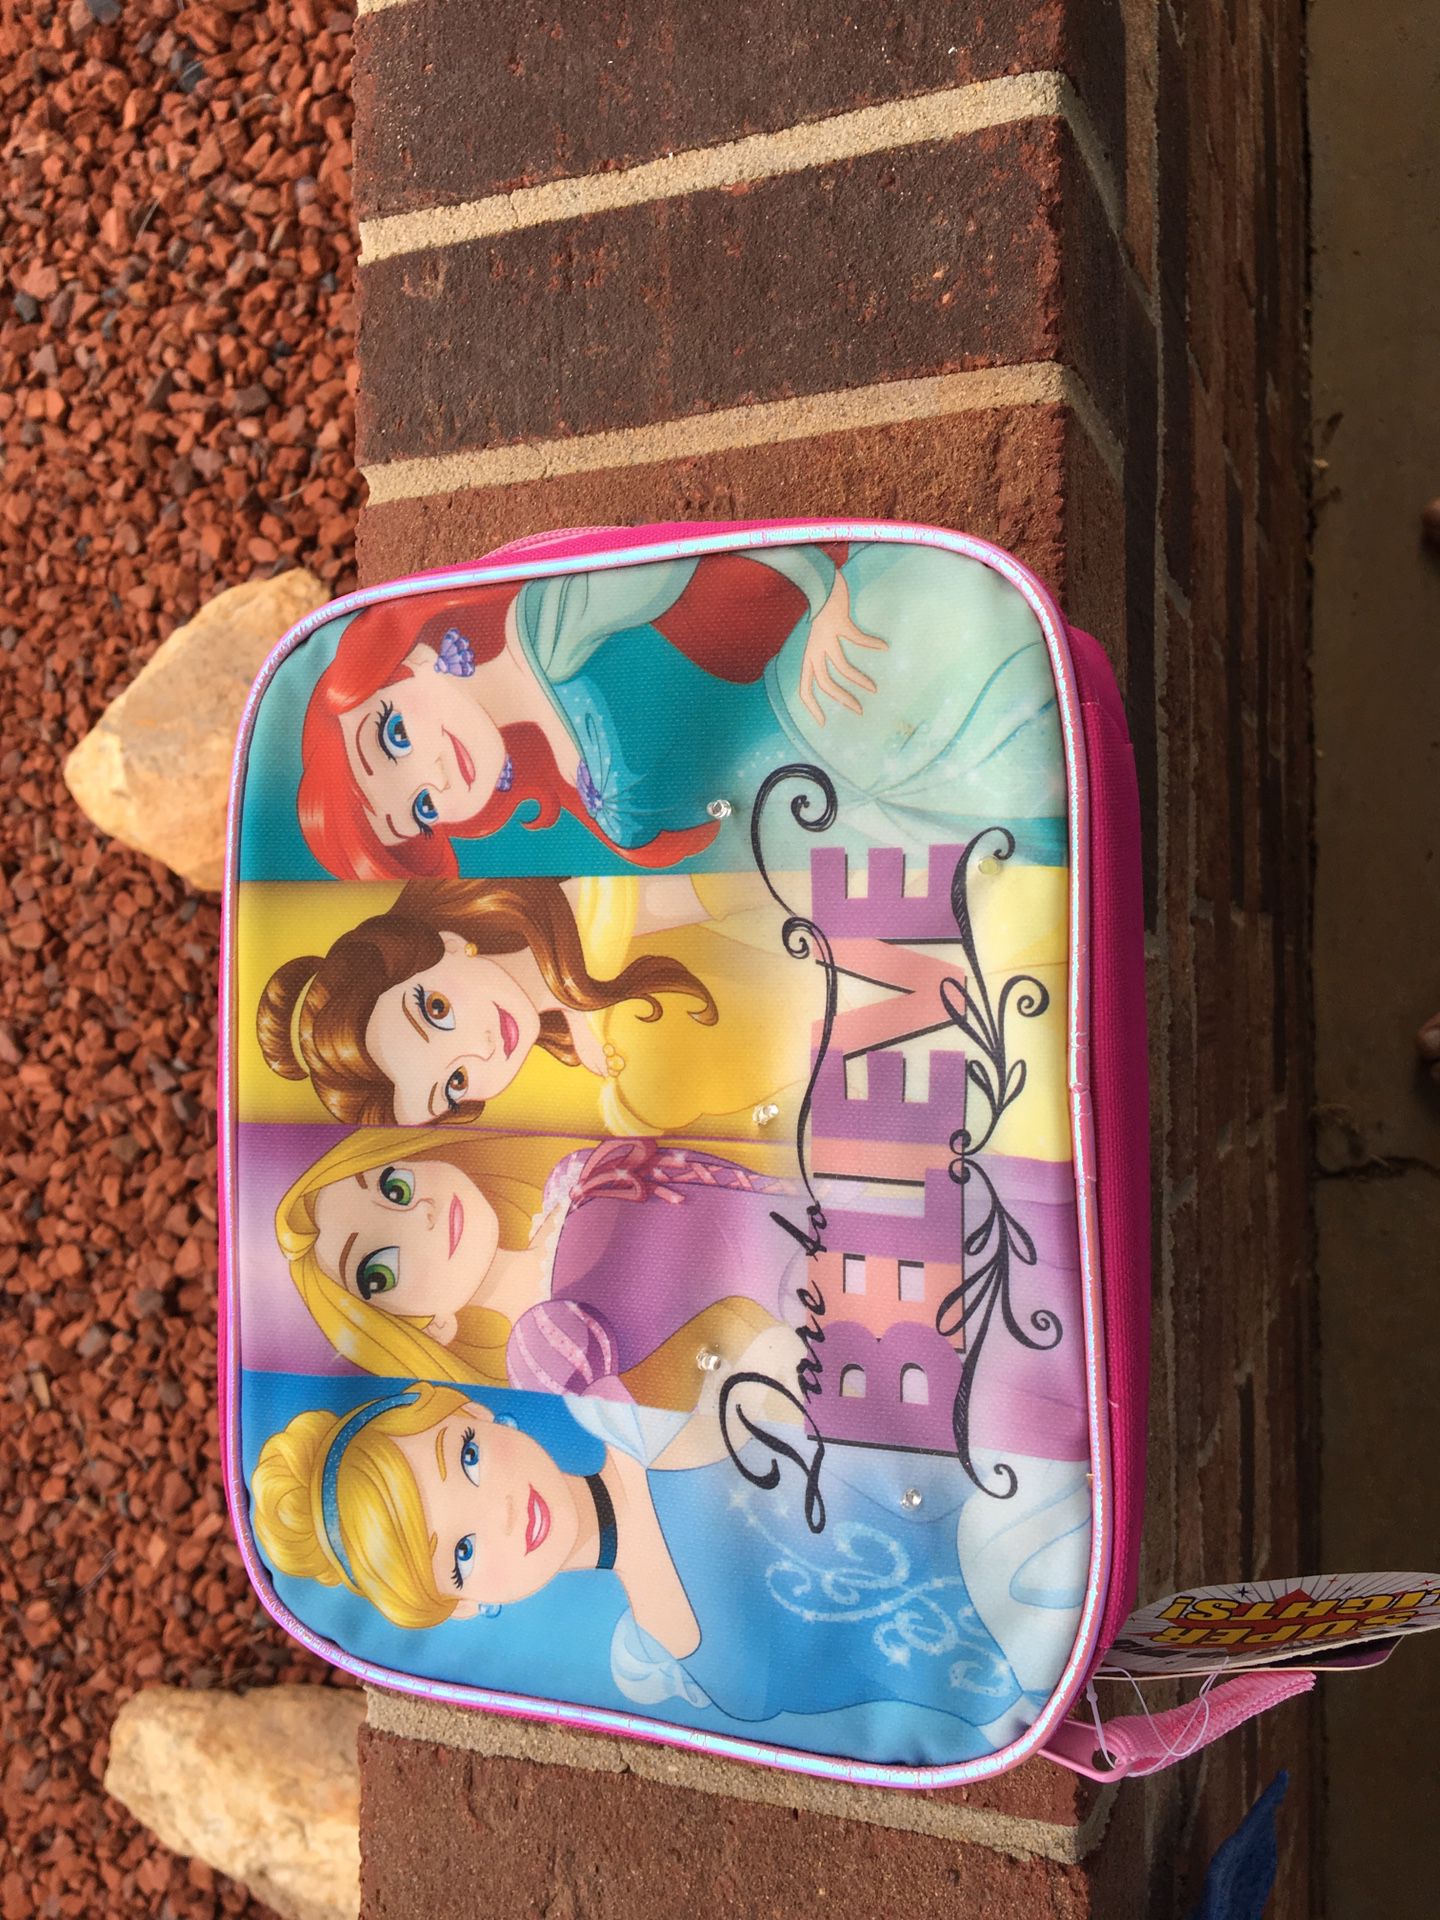 Two Disney princess lunch boxes or toy case $3.00each